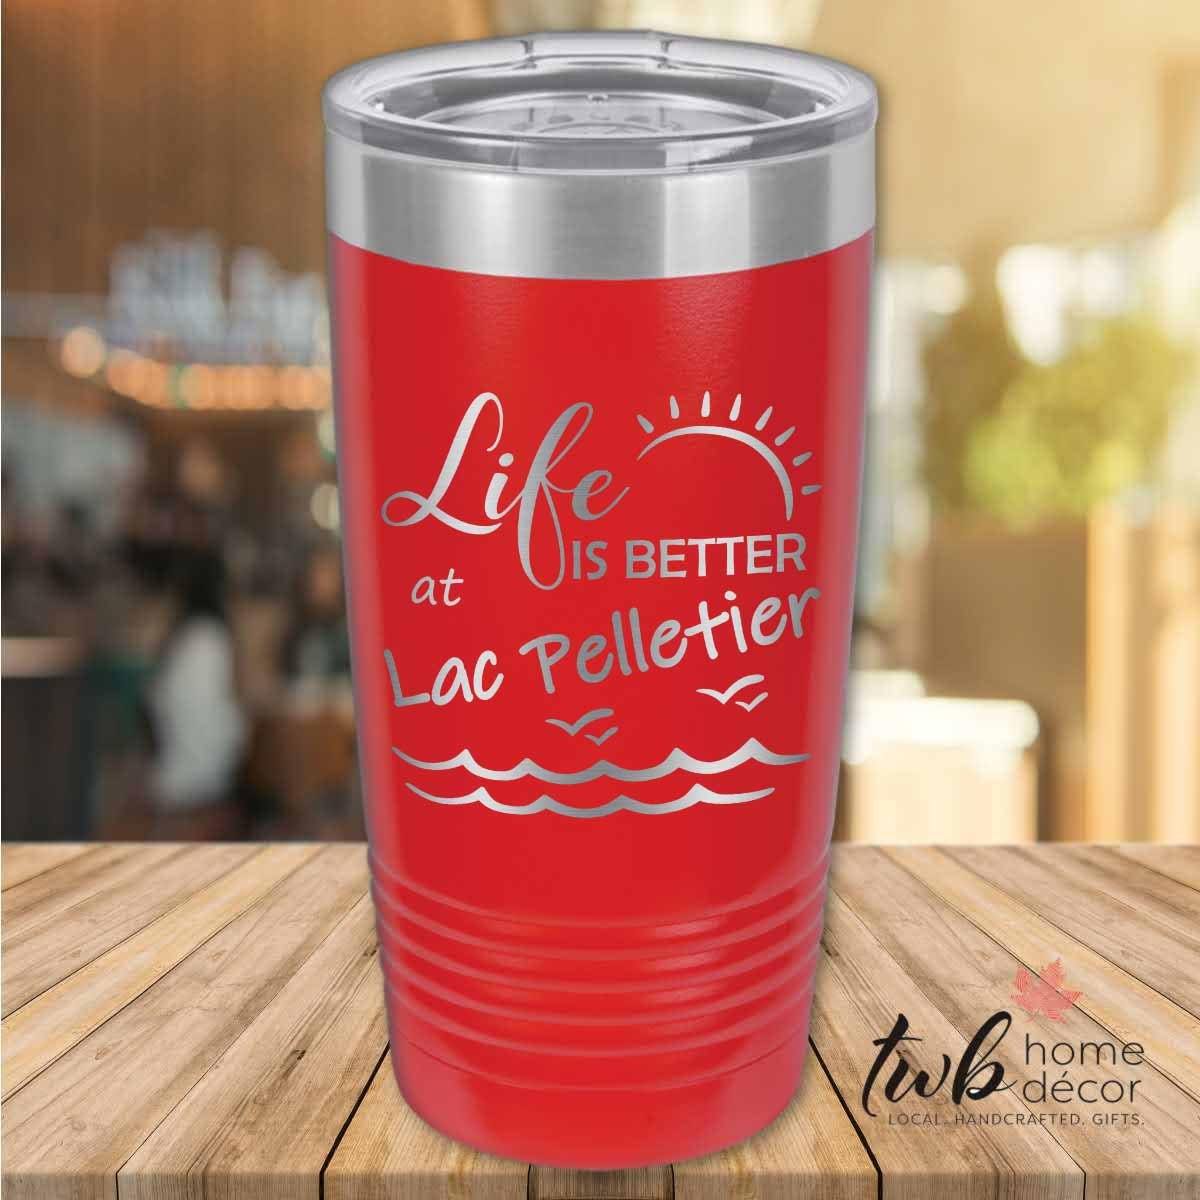 Life is Better at Lac Pelletier - TWB Home Decor